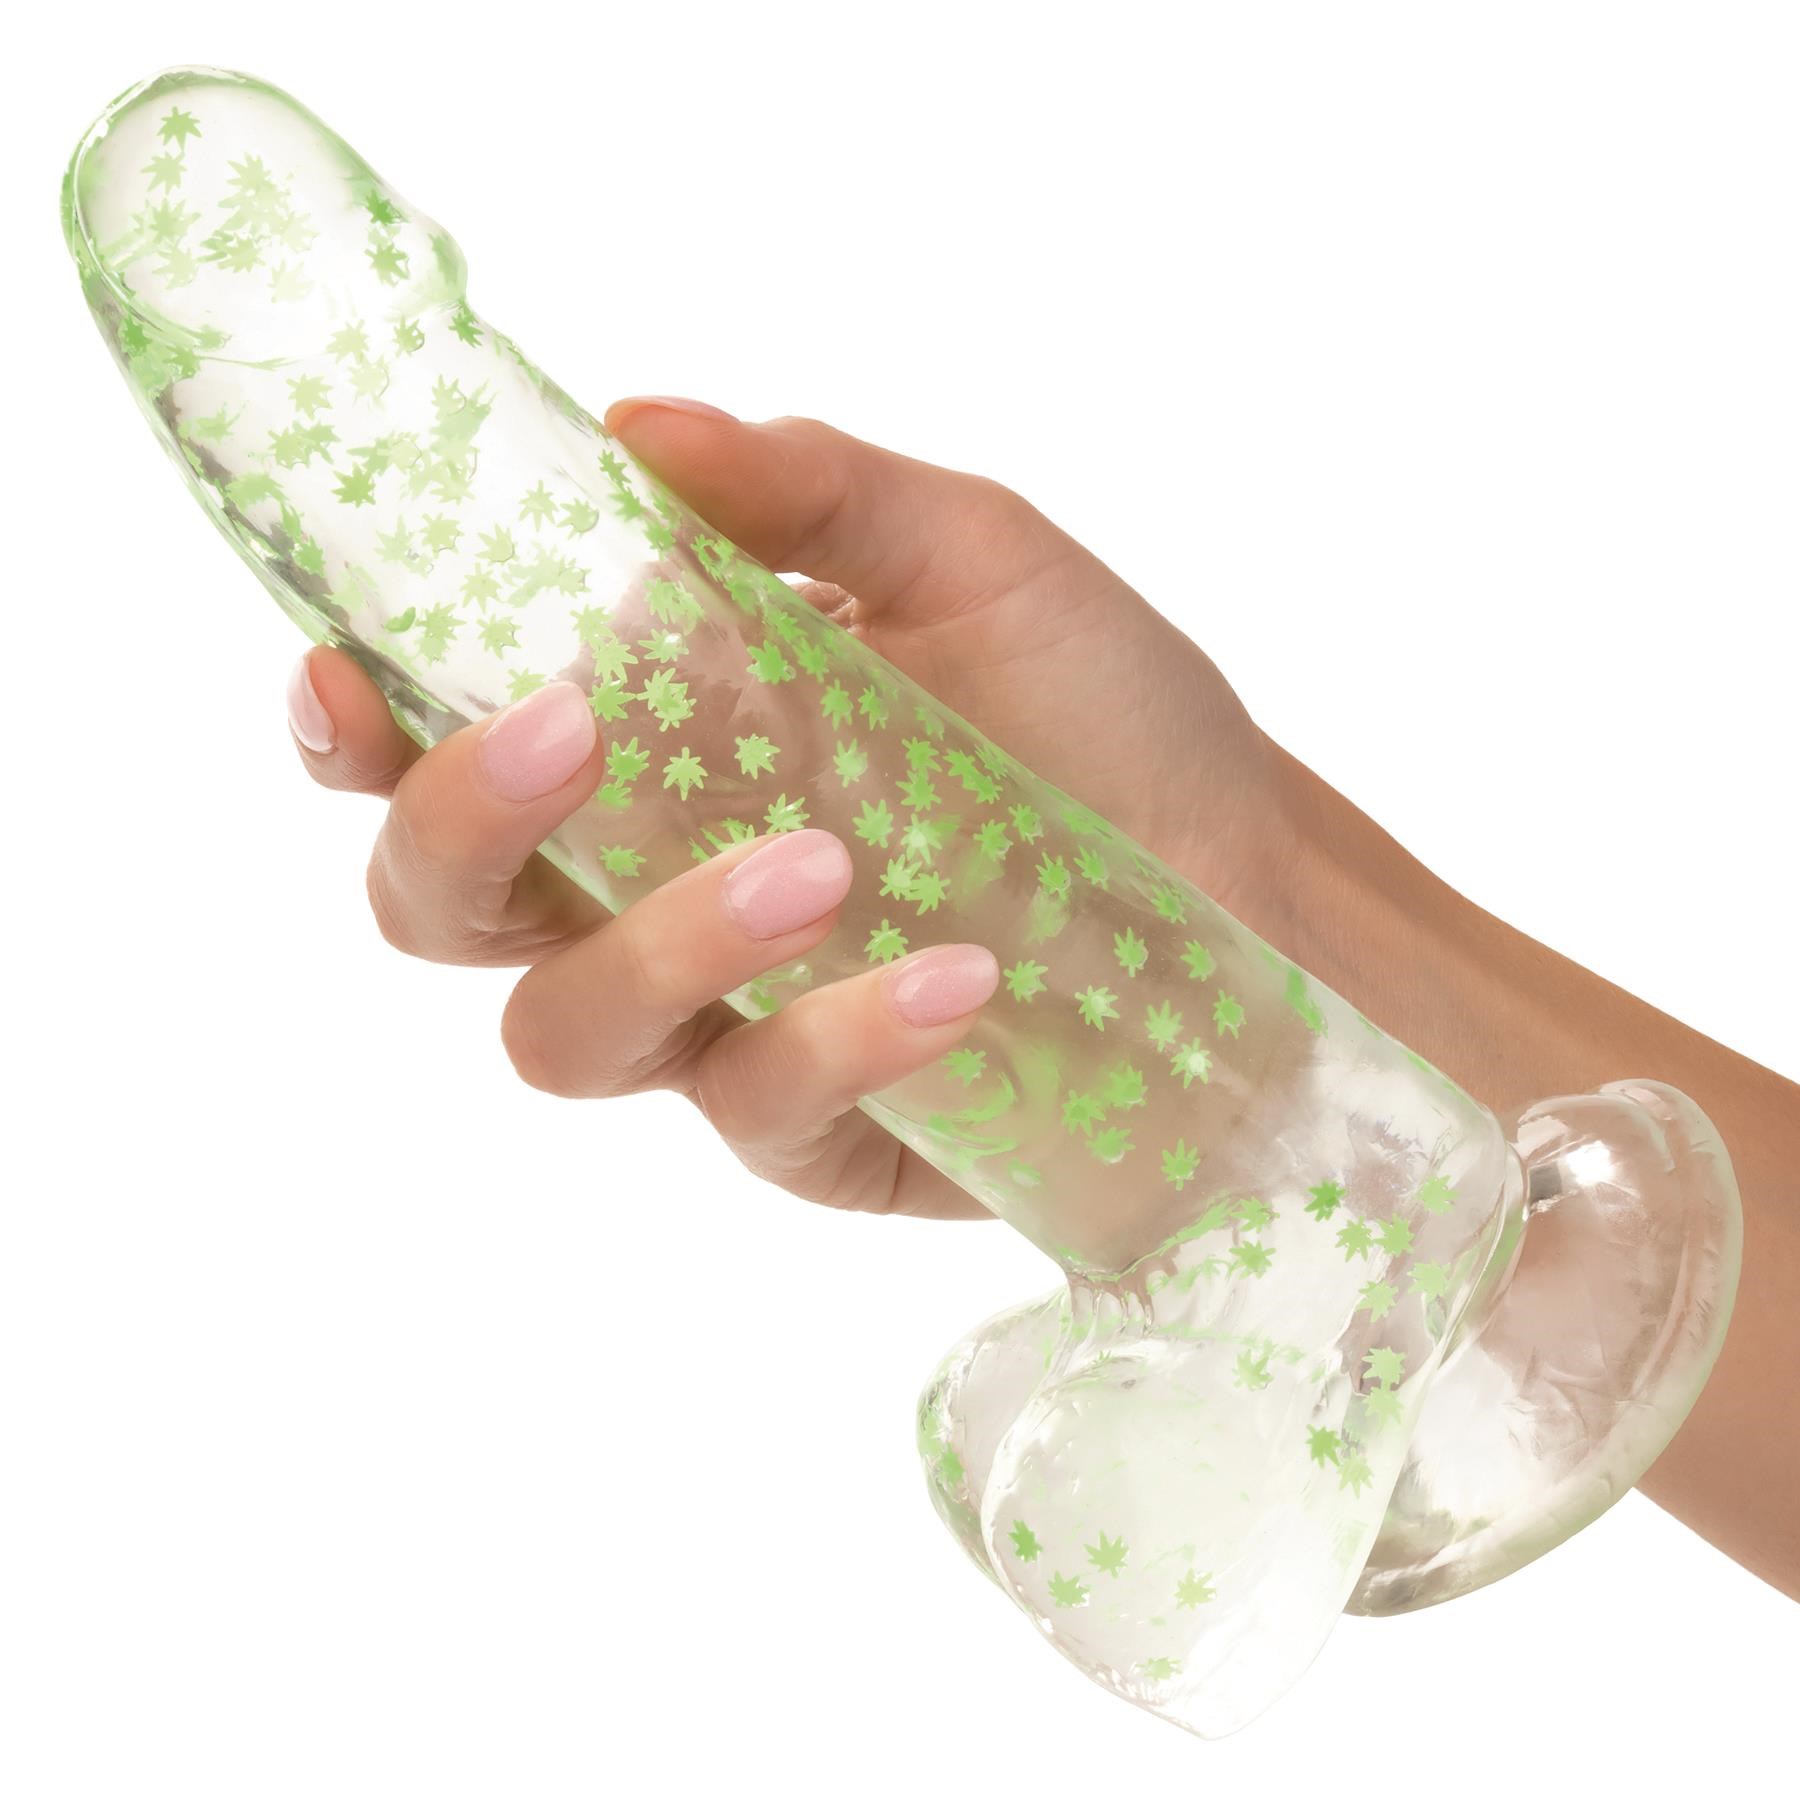 Naughty Bits Leaf Glow In The Dark Dildo - Hand Shot to Show Size